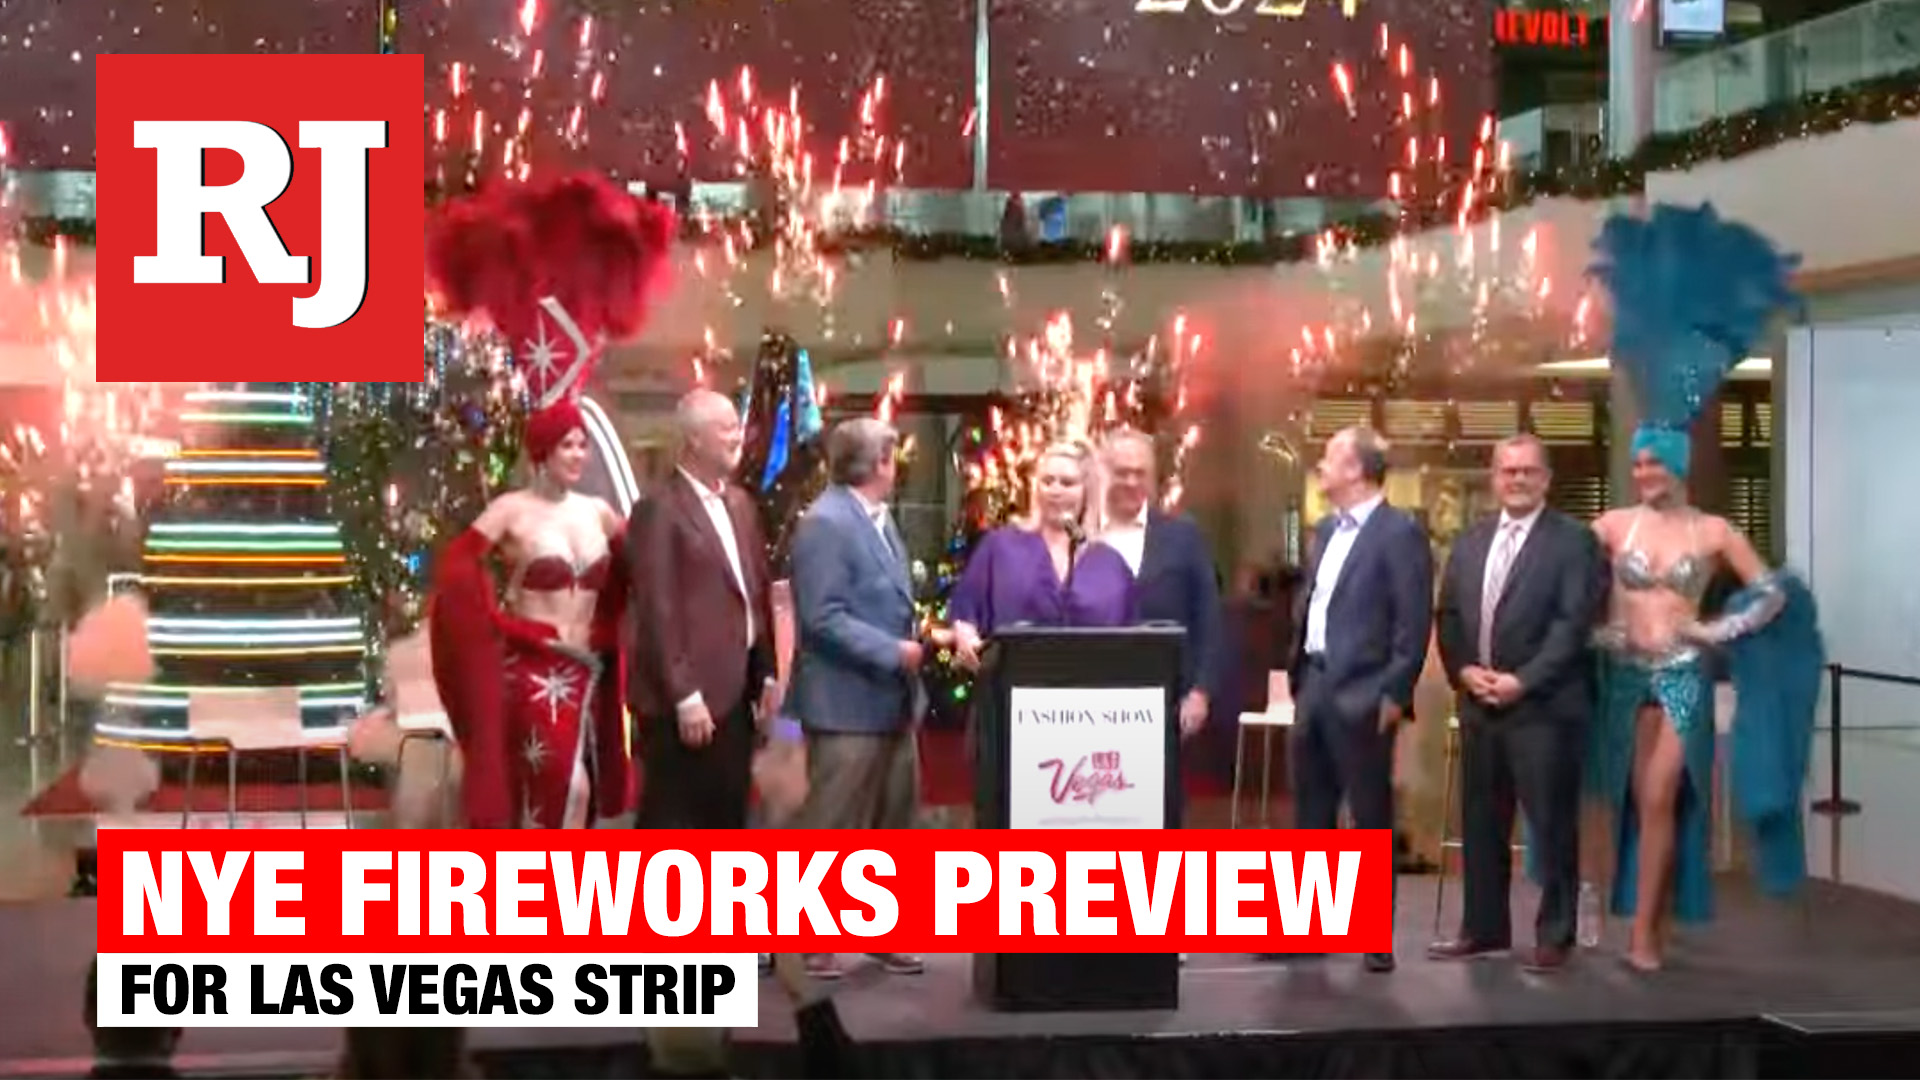 New Year's Eve fireworks show preview